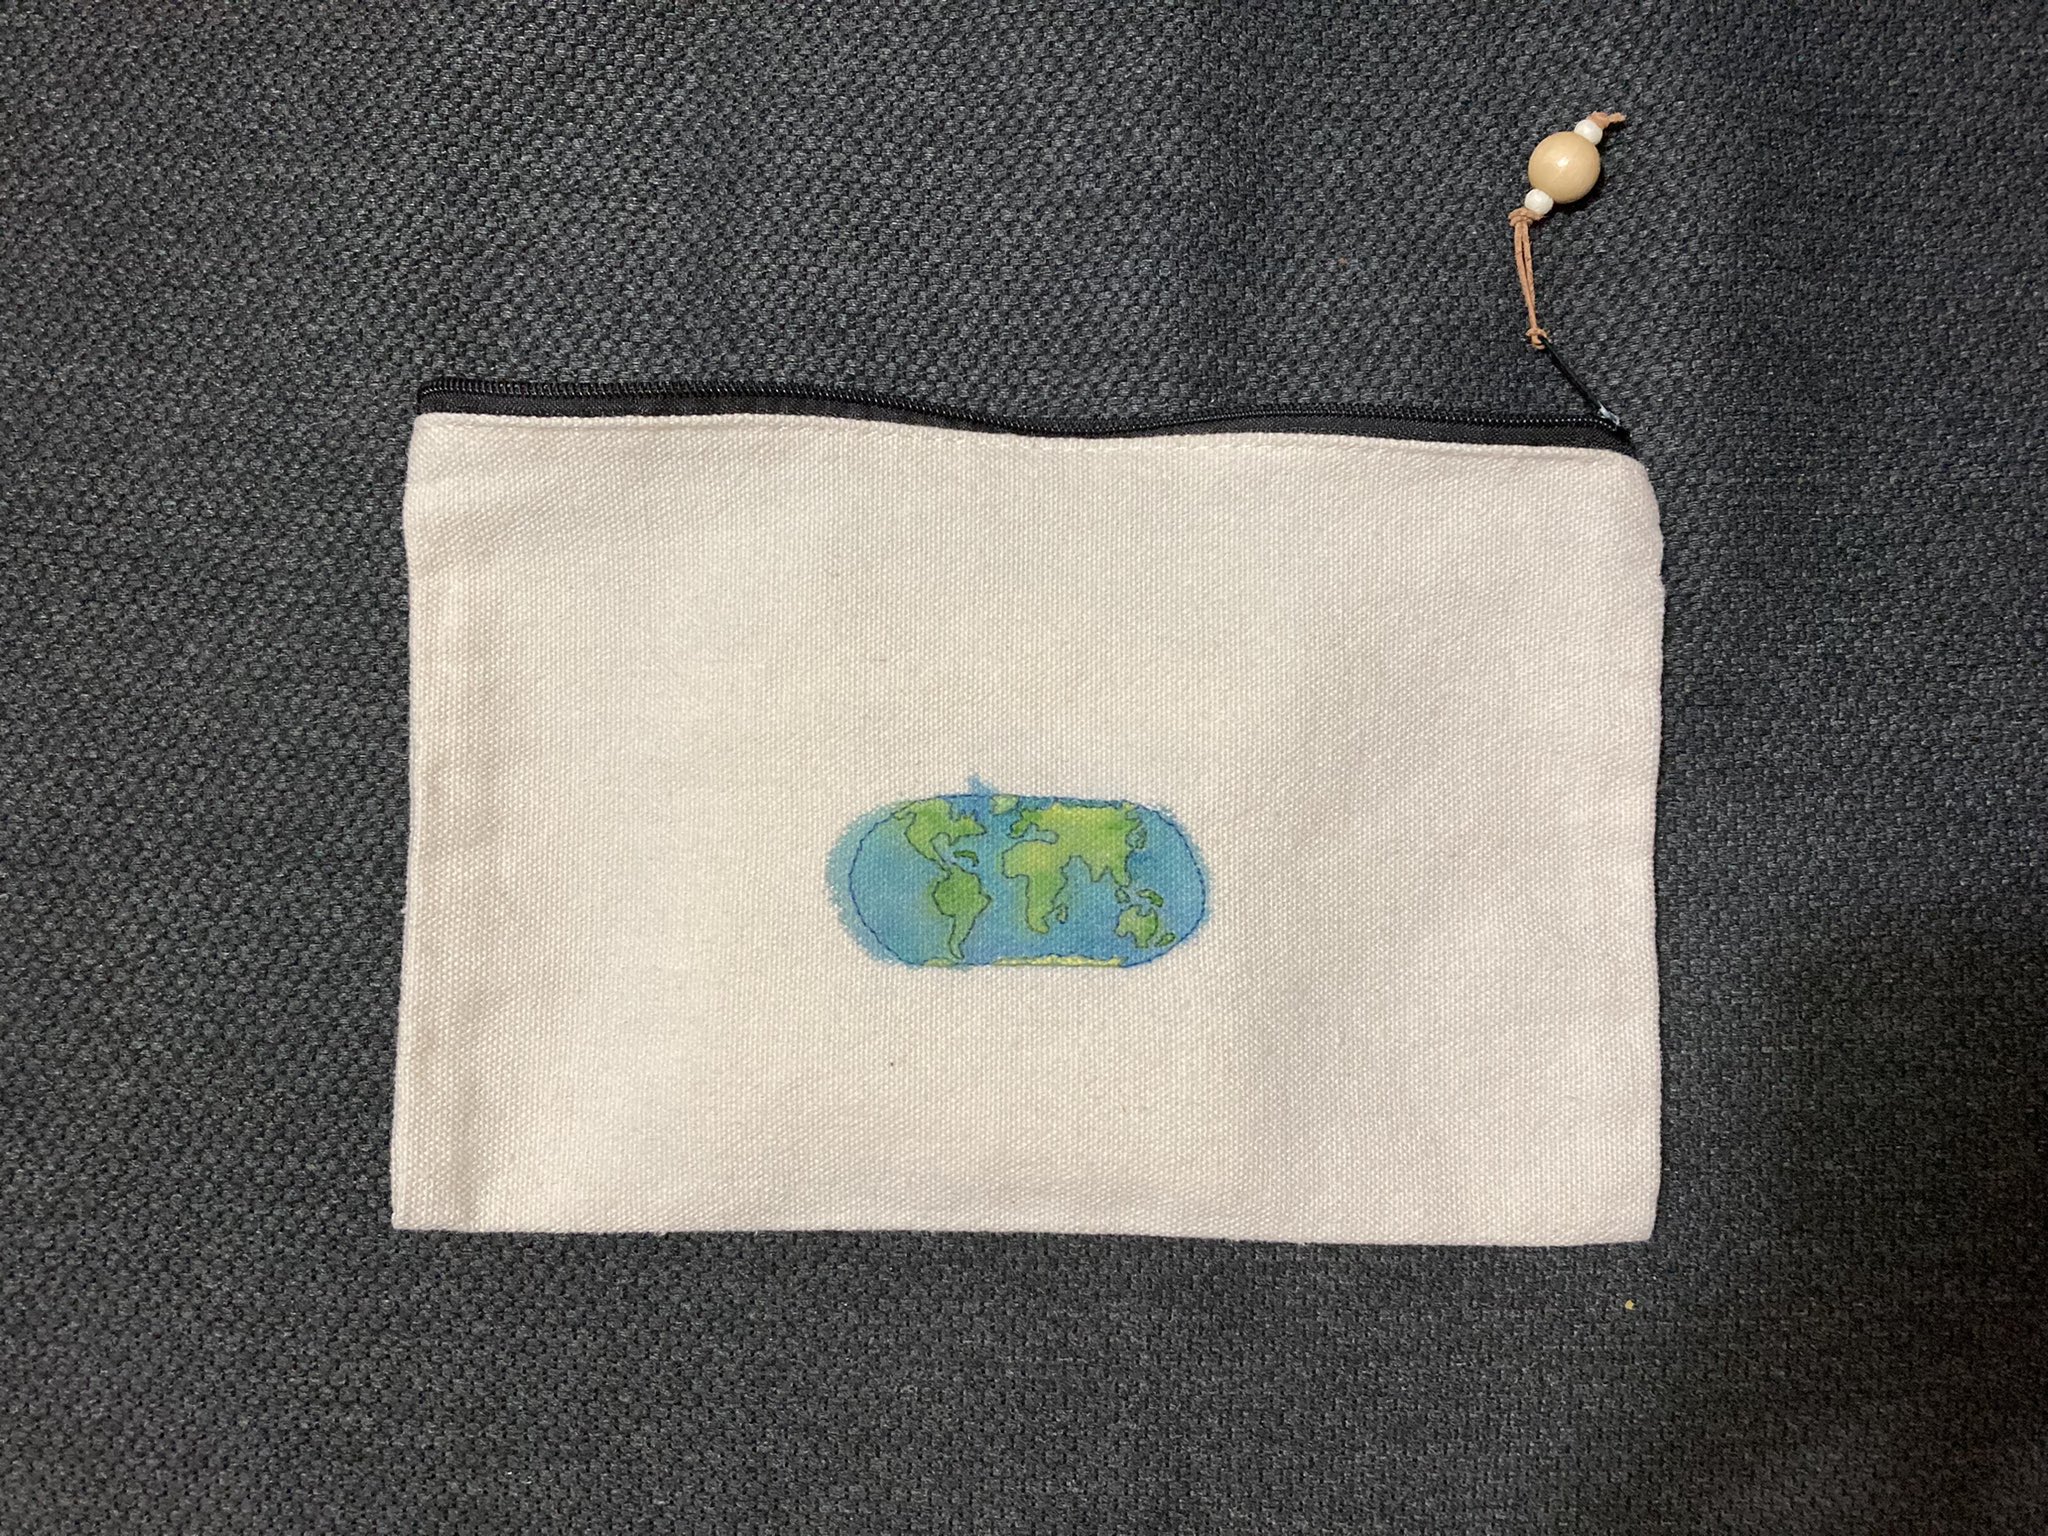 Small canvas pouch with a world map embroidered and painted